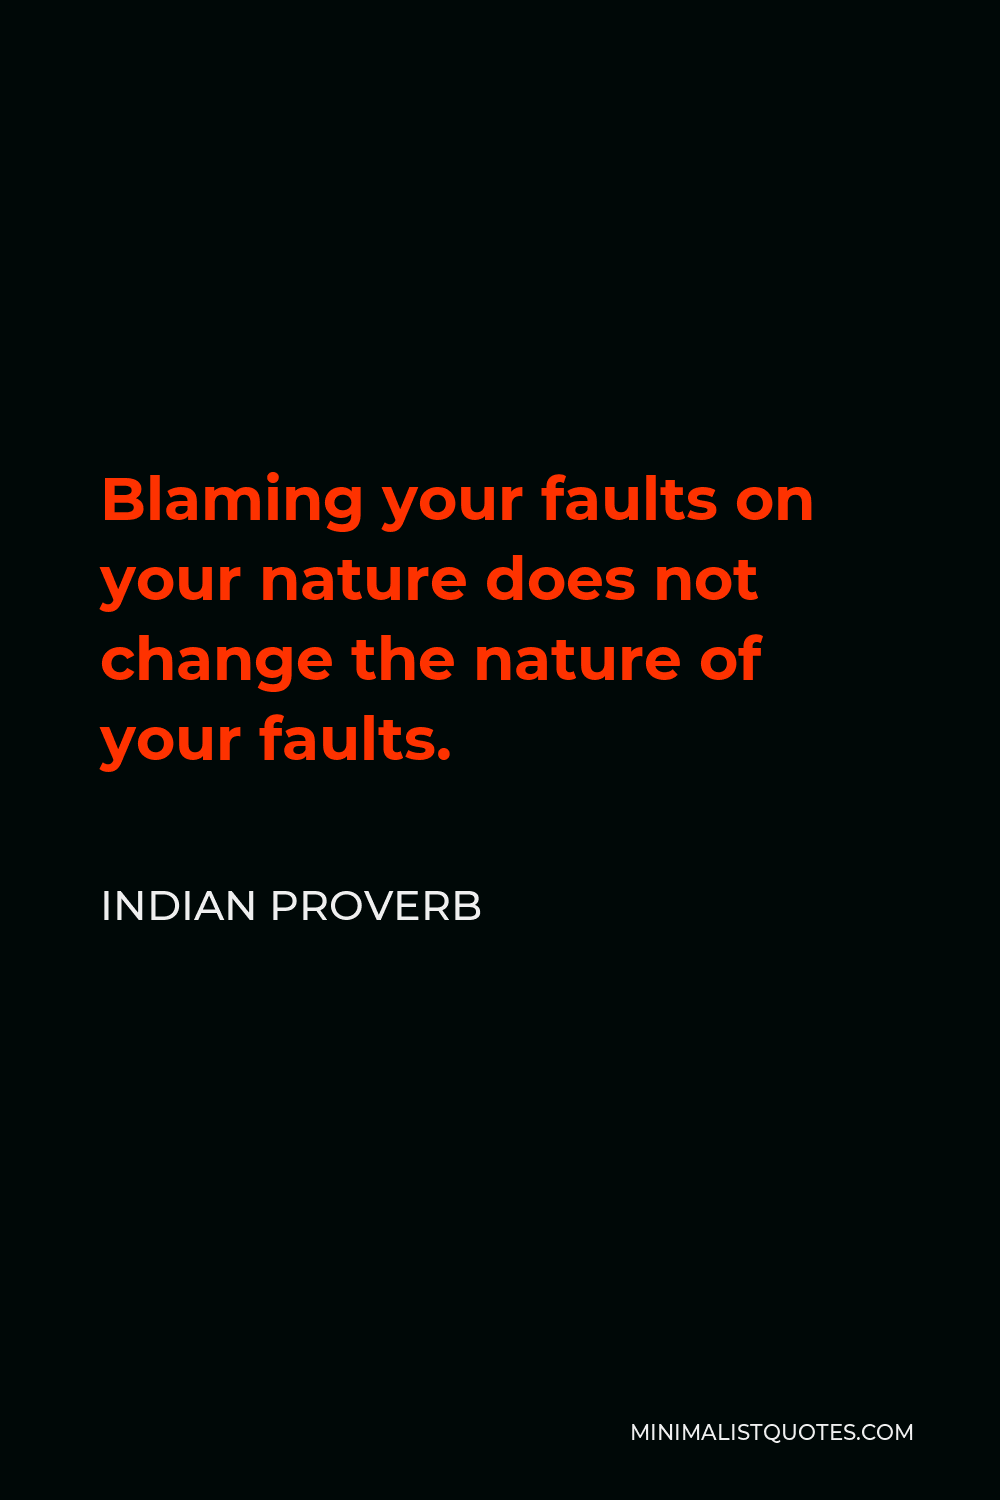 Indian Proverb Quote - Blaming your faults on your nature does not change the nature of your faults.